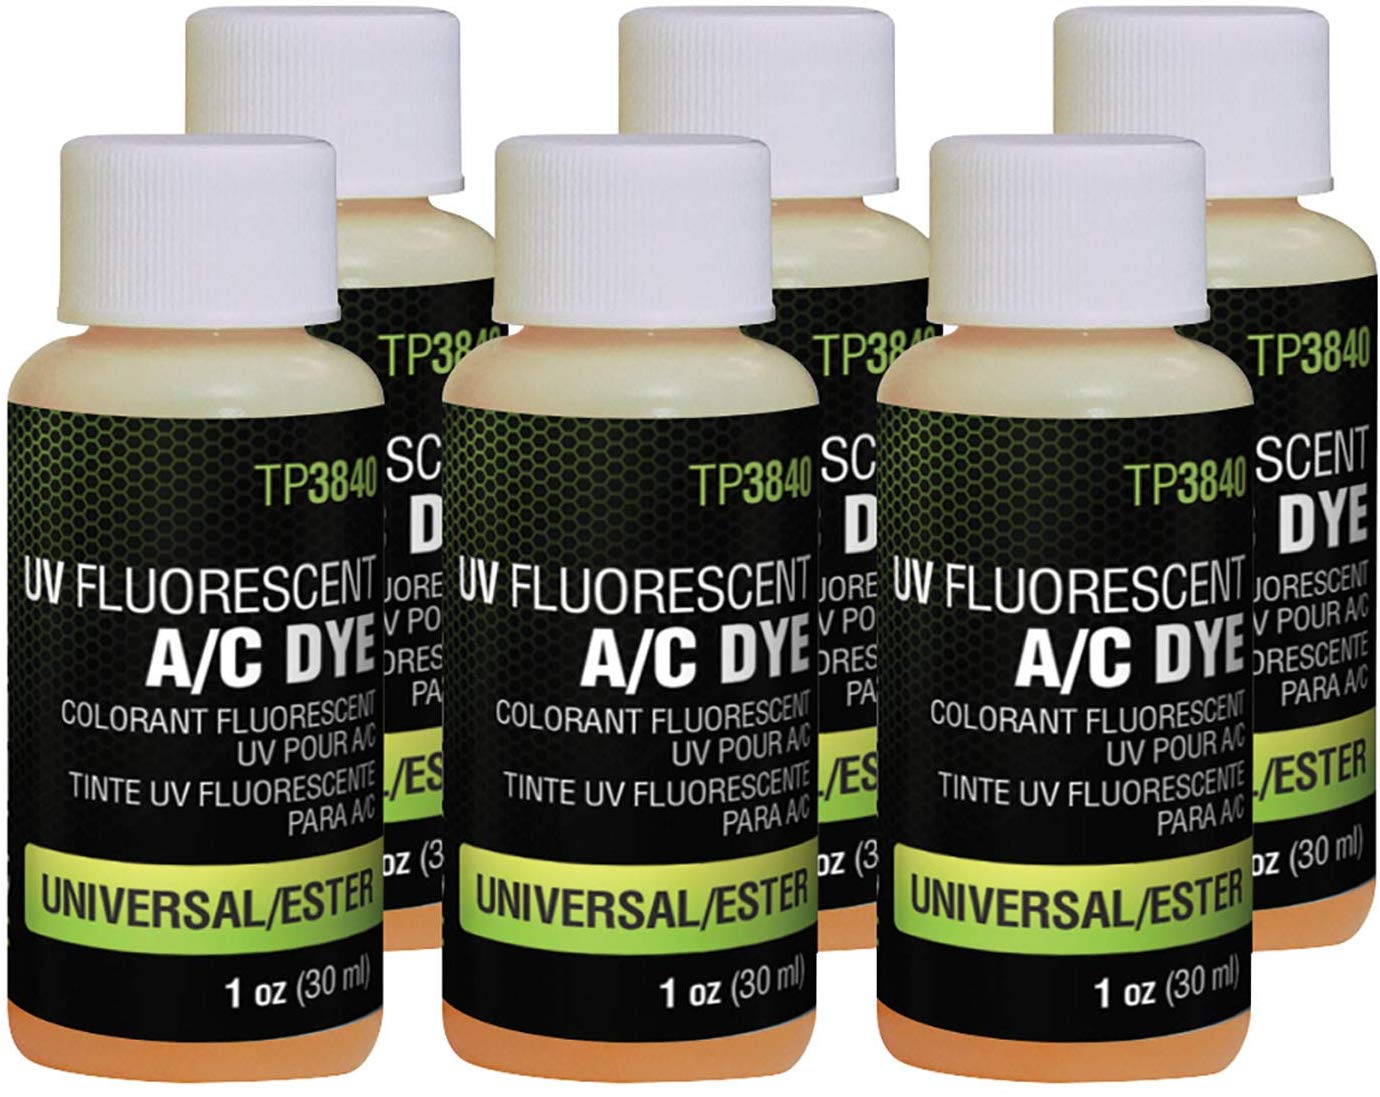 1 oz (30 ml) Universal/Ester bottles. services up to 24 vehicles - MPR Tools & Equipment